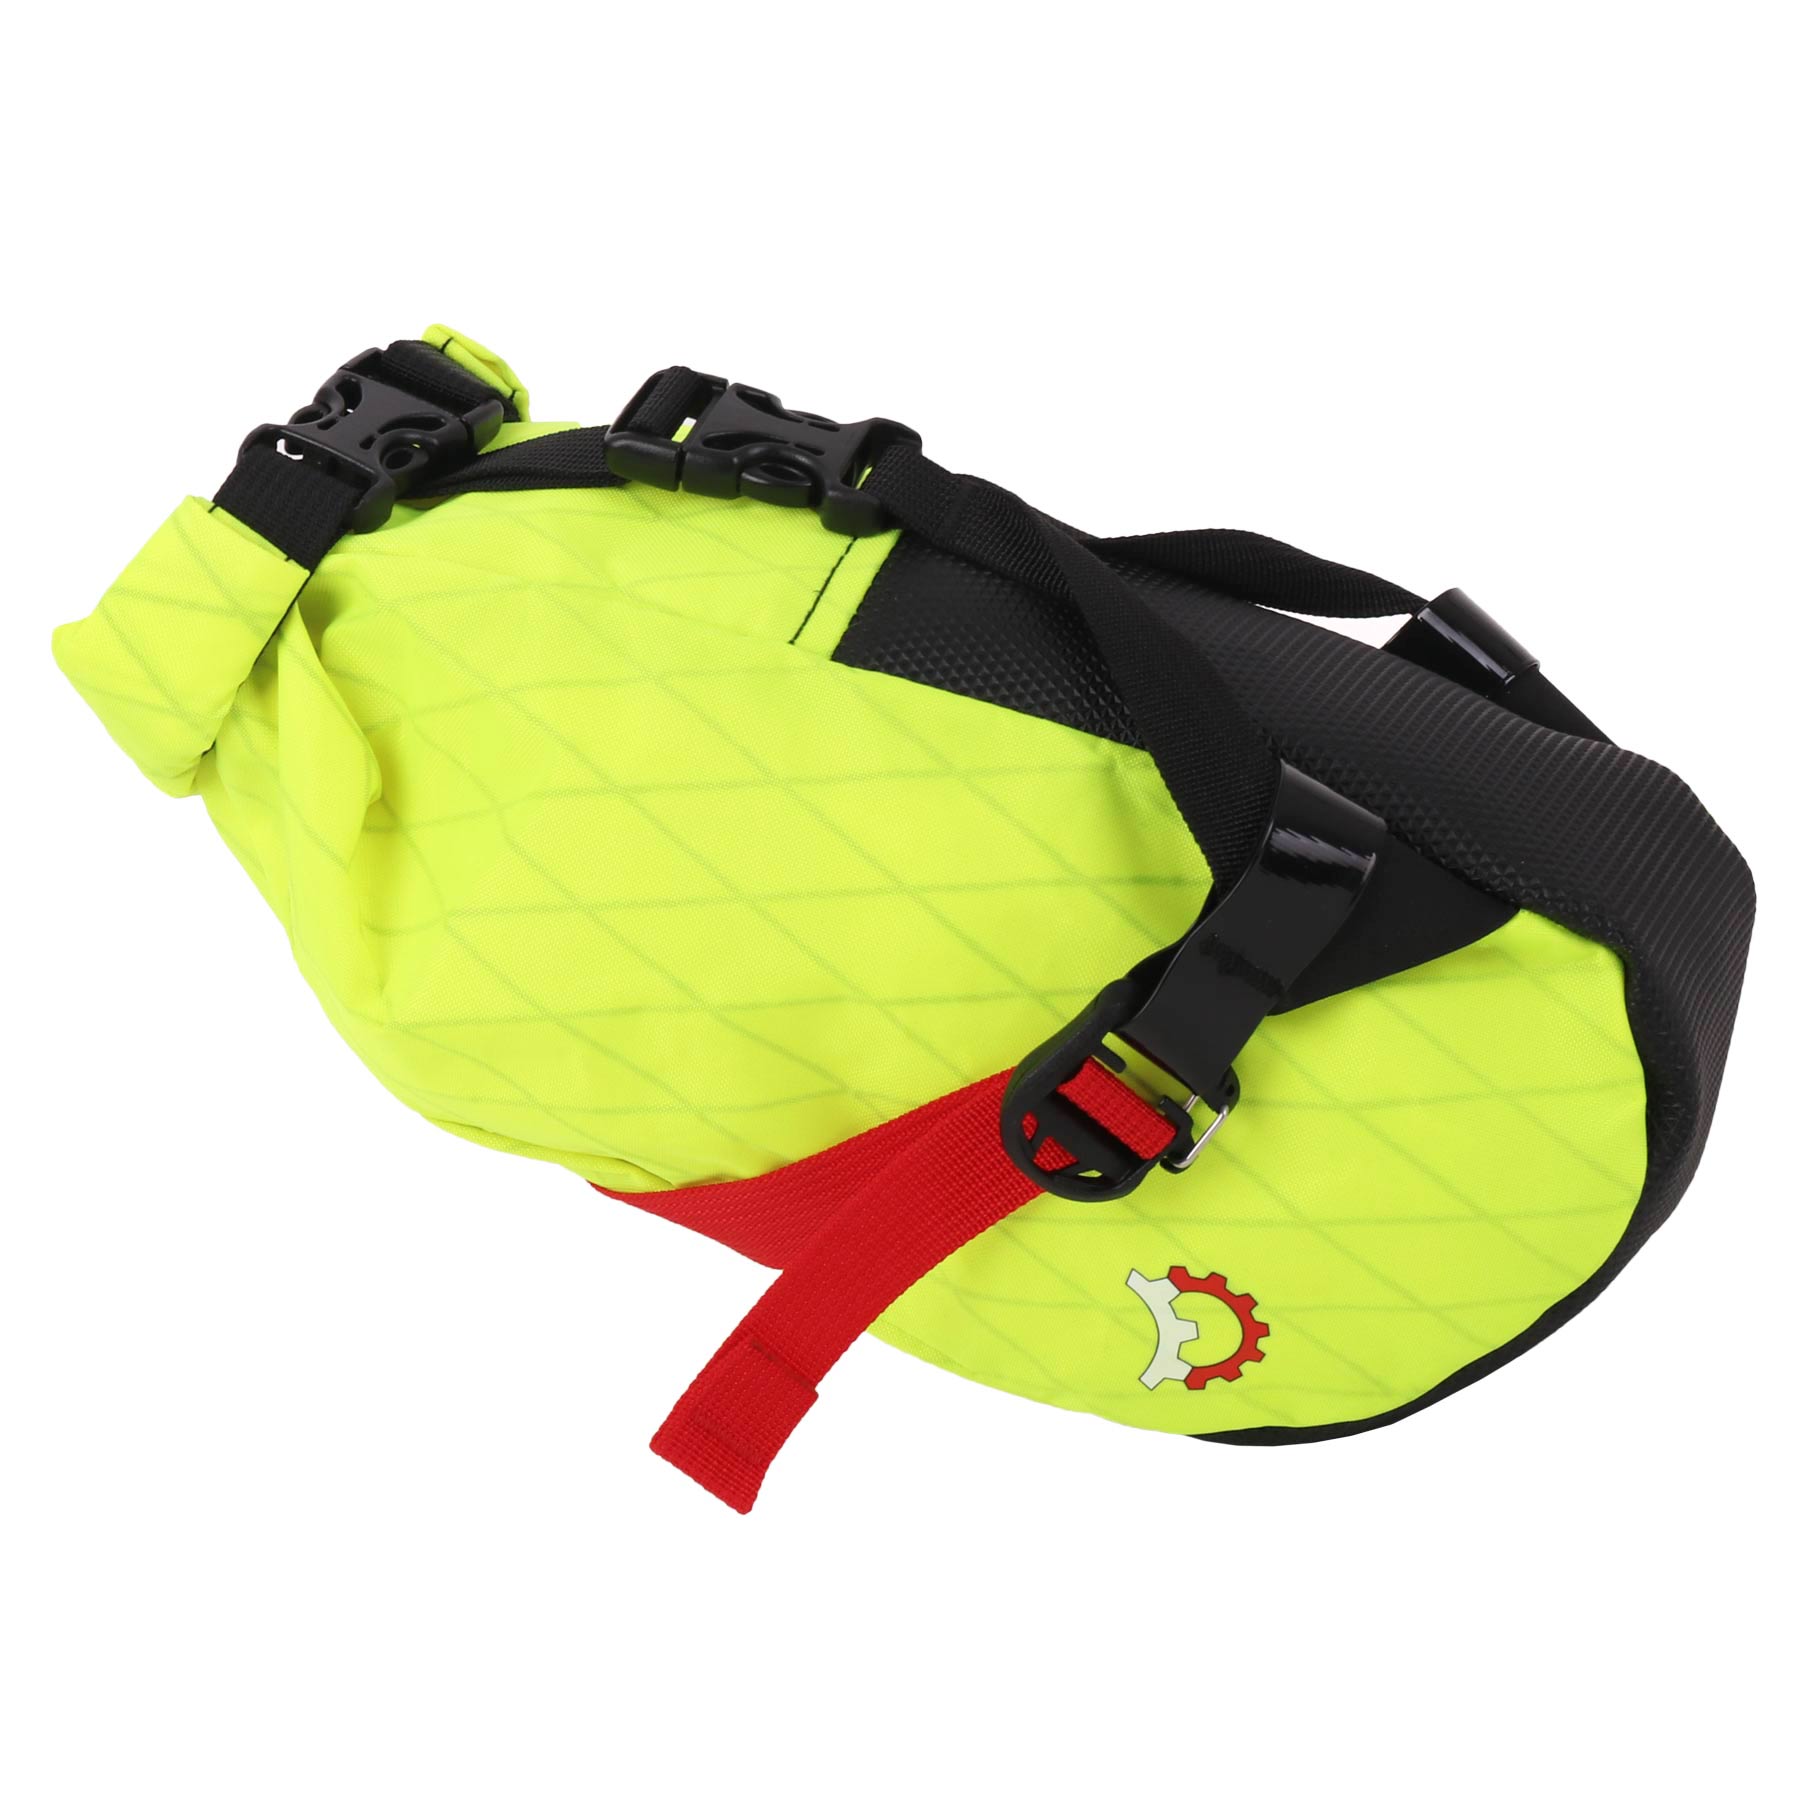 Picture of Revelate Designs Shrew 2.25L Seat Bag - HiVis lime